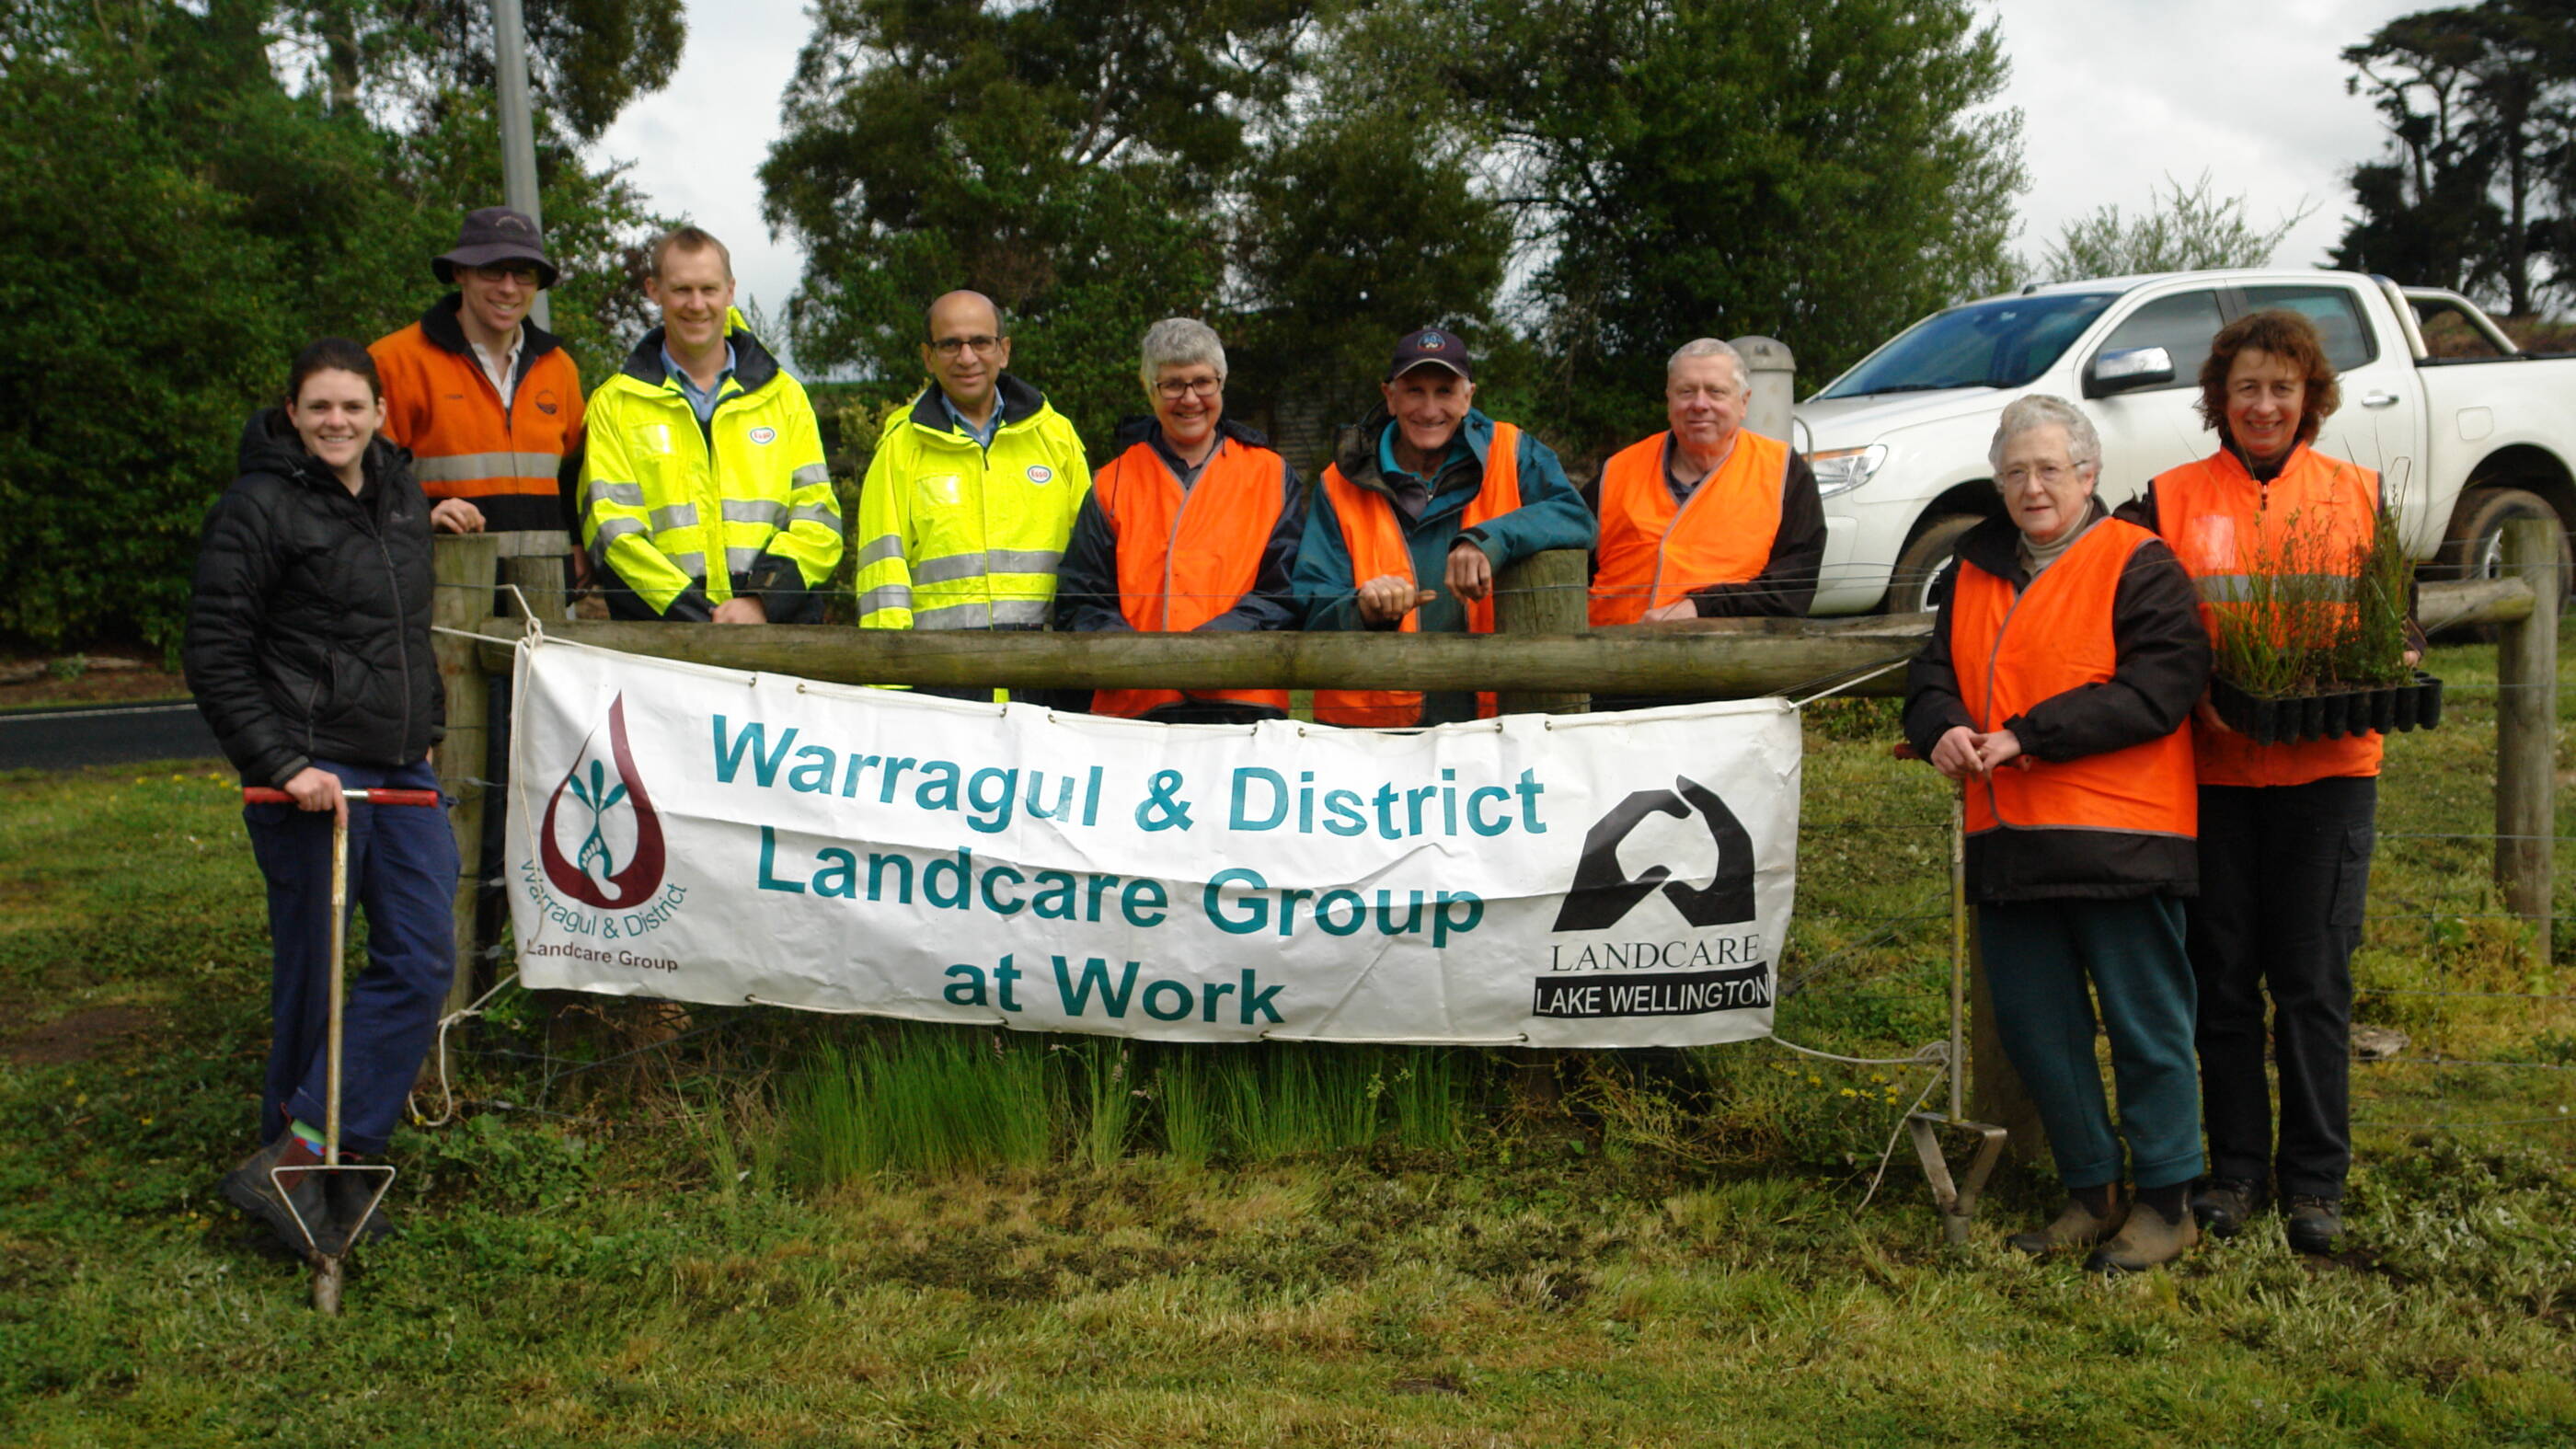 Image Photo  Esso employees recently joined Baw Baw Shire Council, the Warragul Urban Landcare group and Landcare Australia to undertake planting works at Moroka Reserve in Warragul.